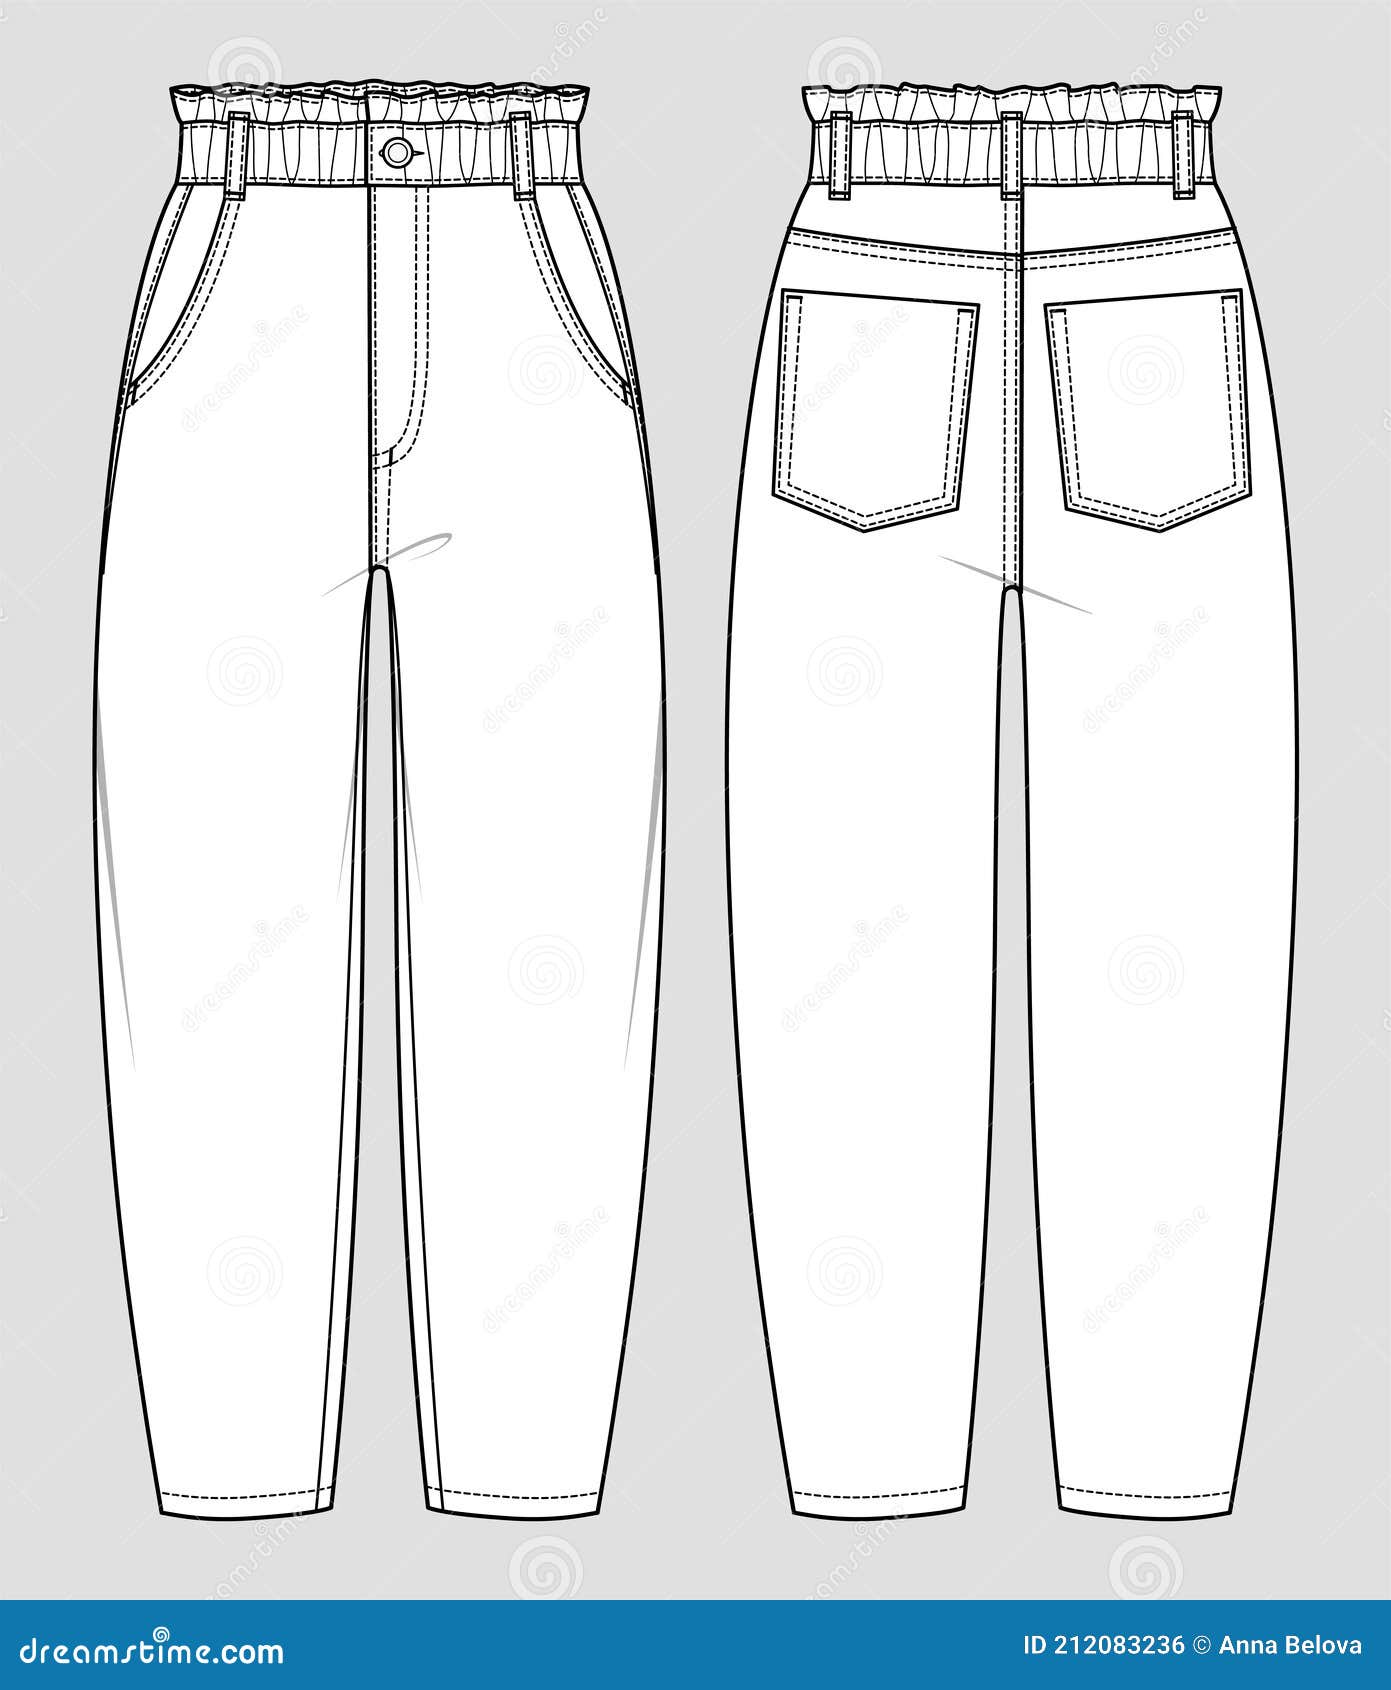 How to draw a Baggy Pants  YouTube